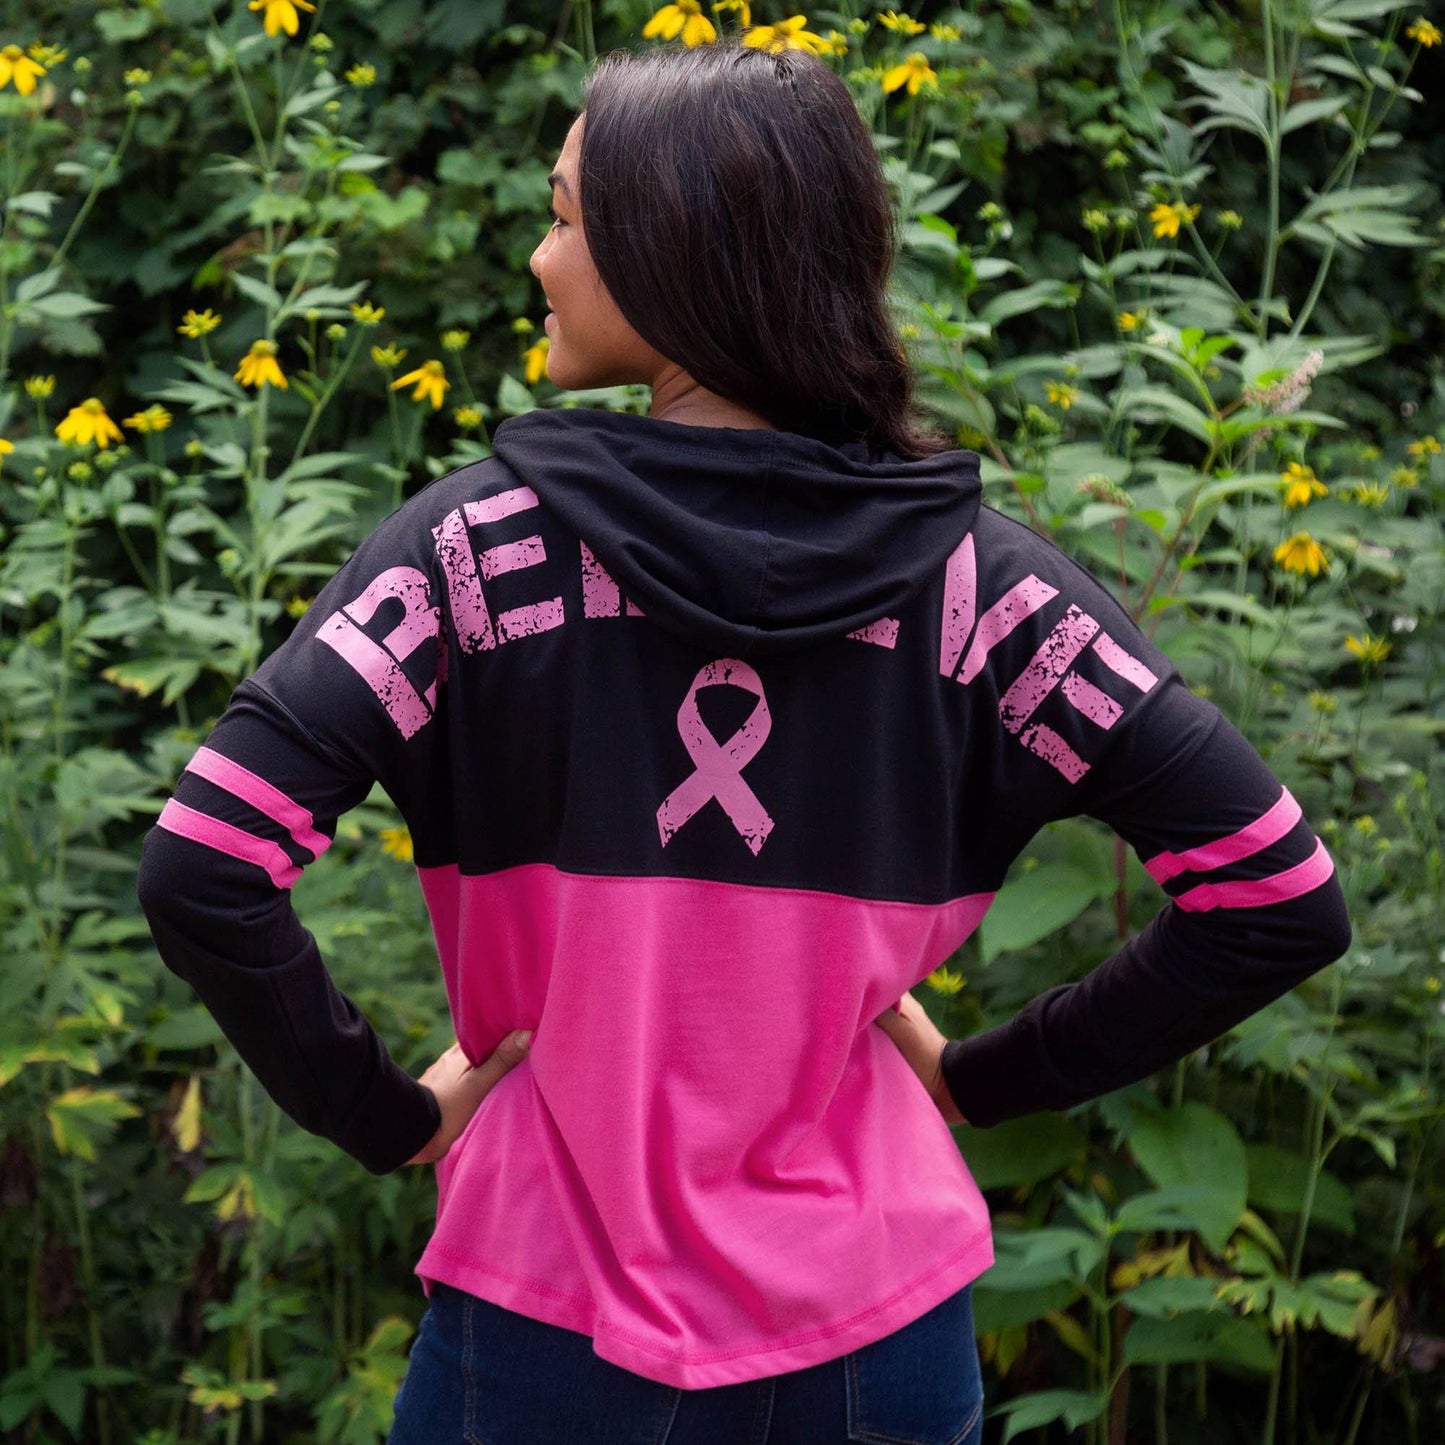 Believe Pink Ribbon Two-Toned Hooded Tee